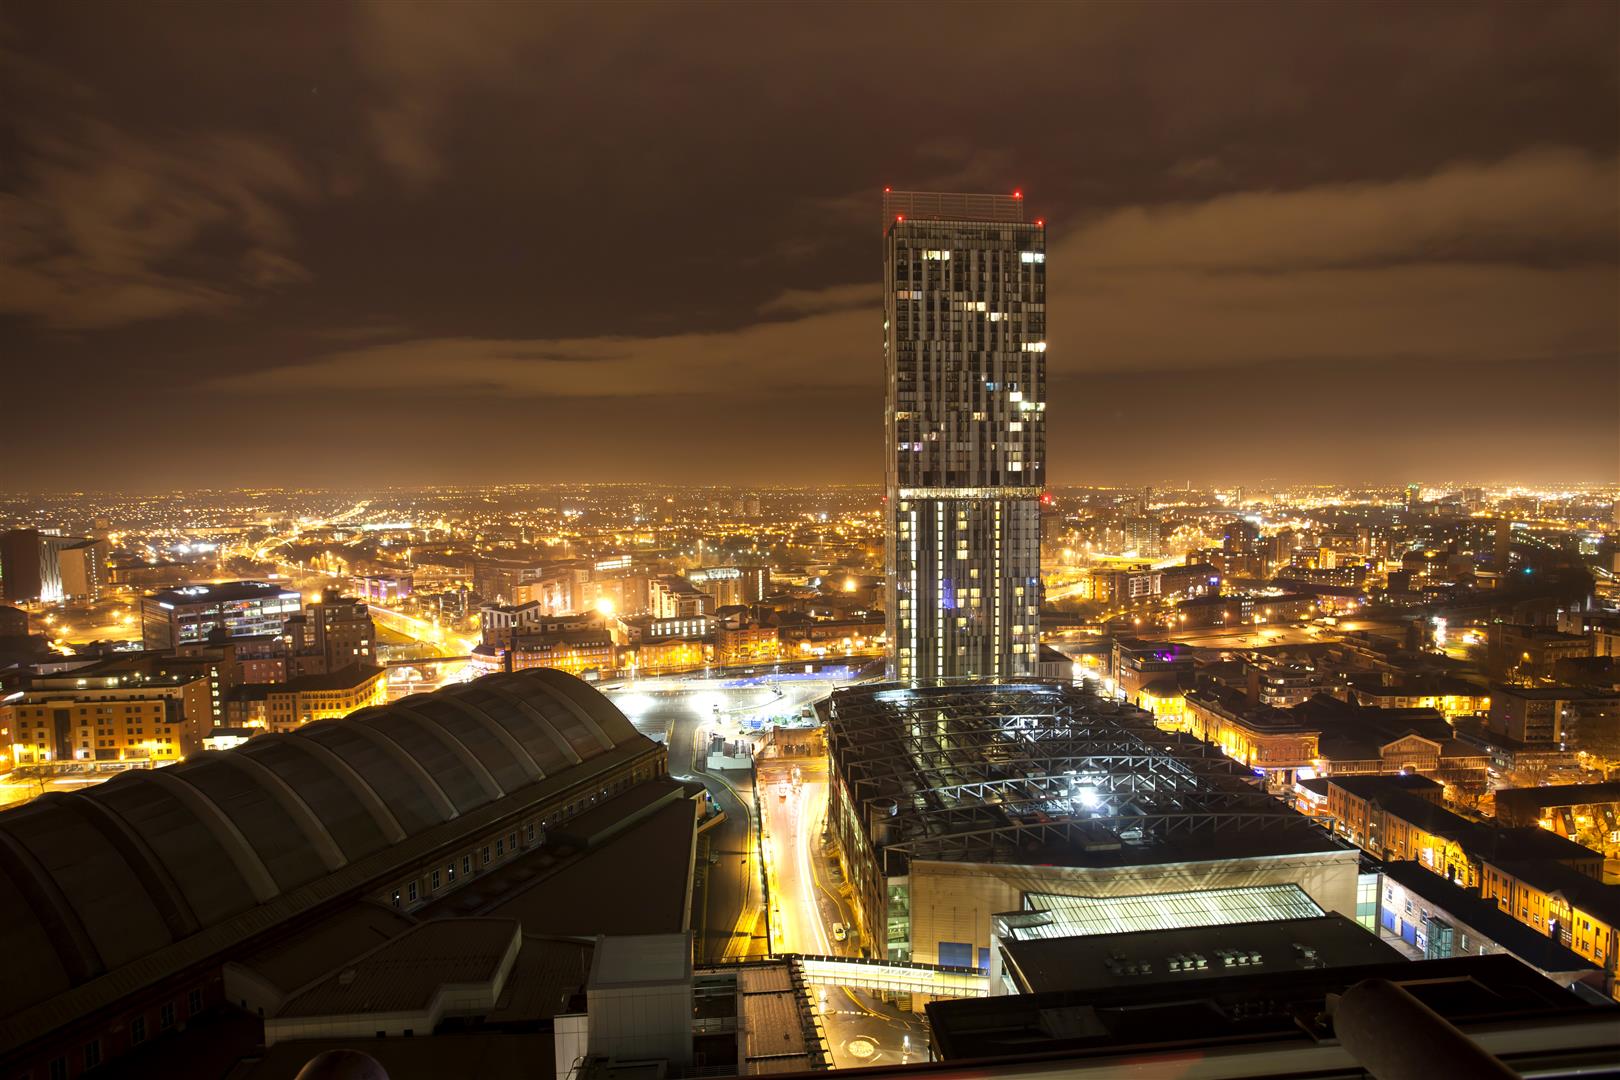 Manchester saw big rises in the acquisition of office space